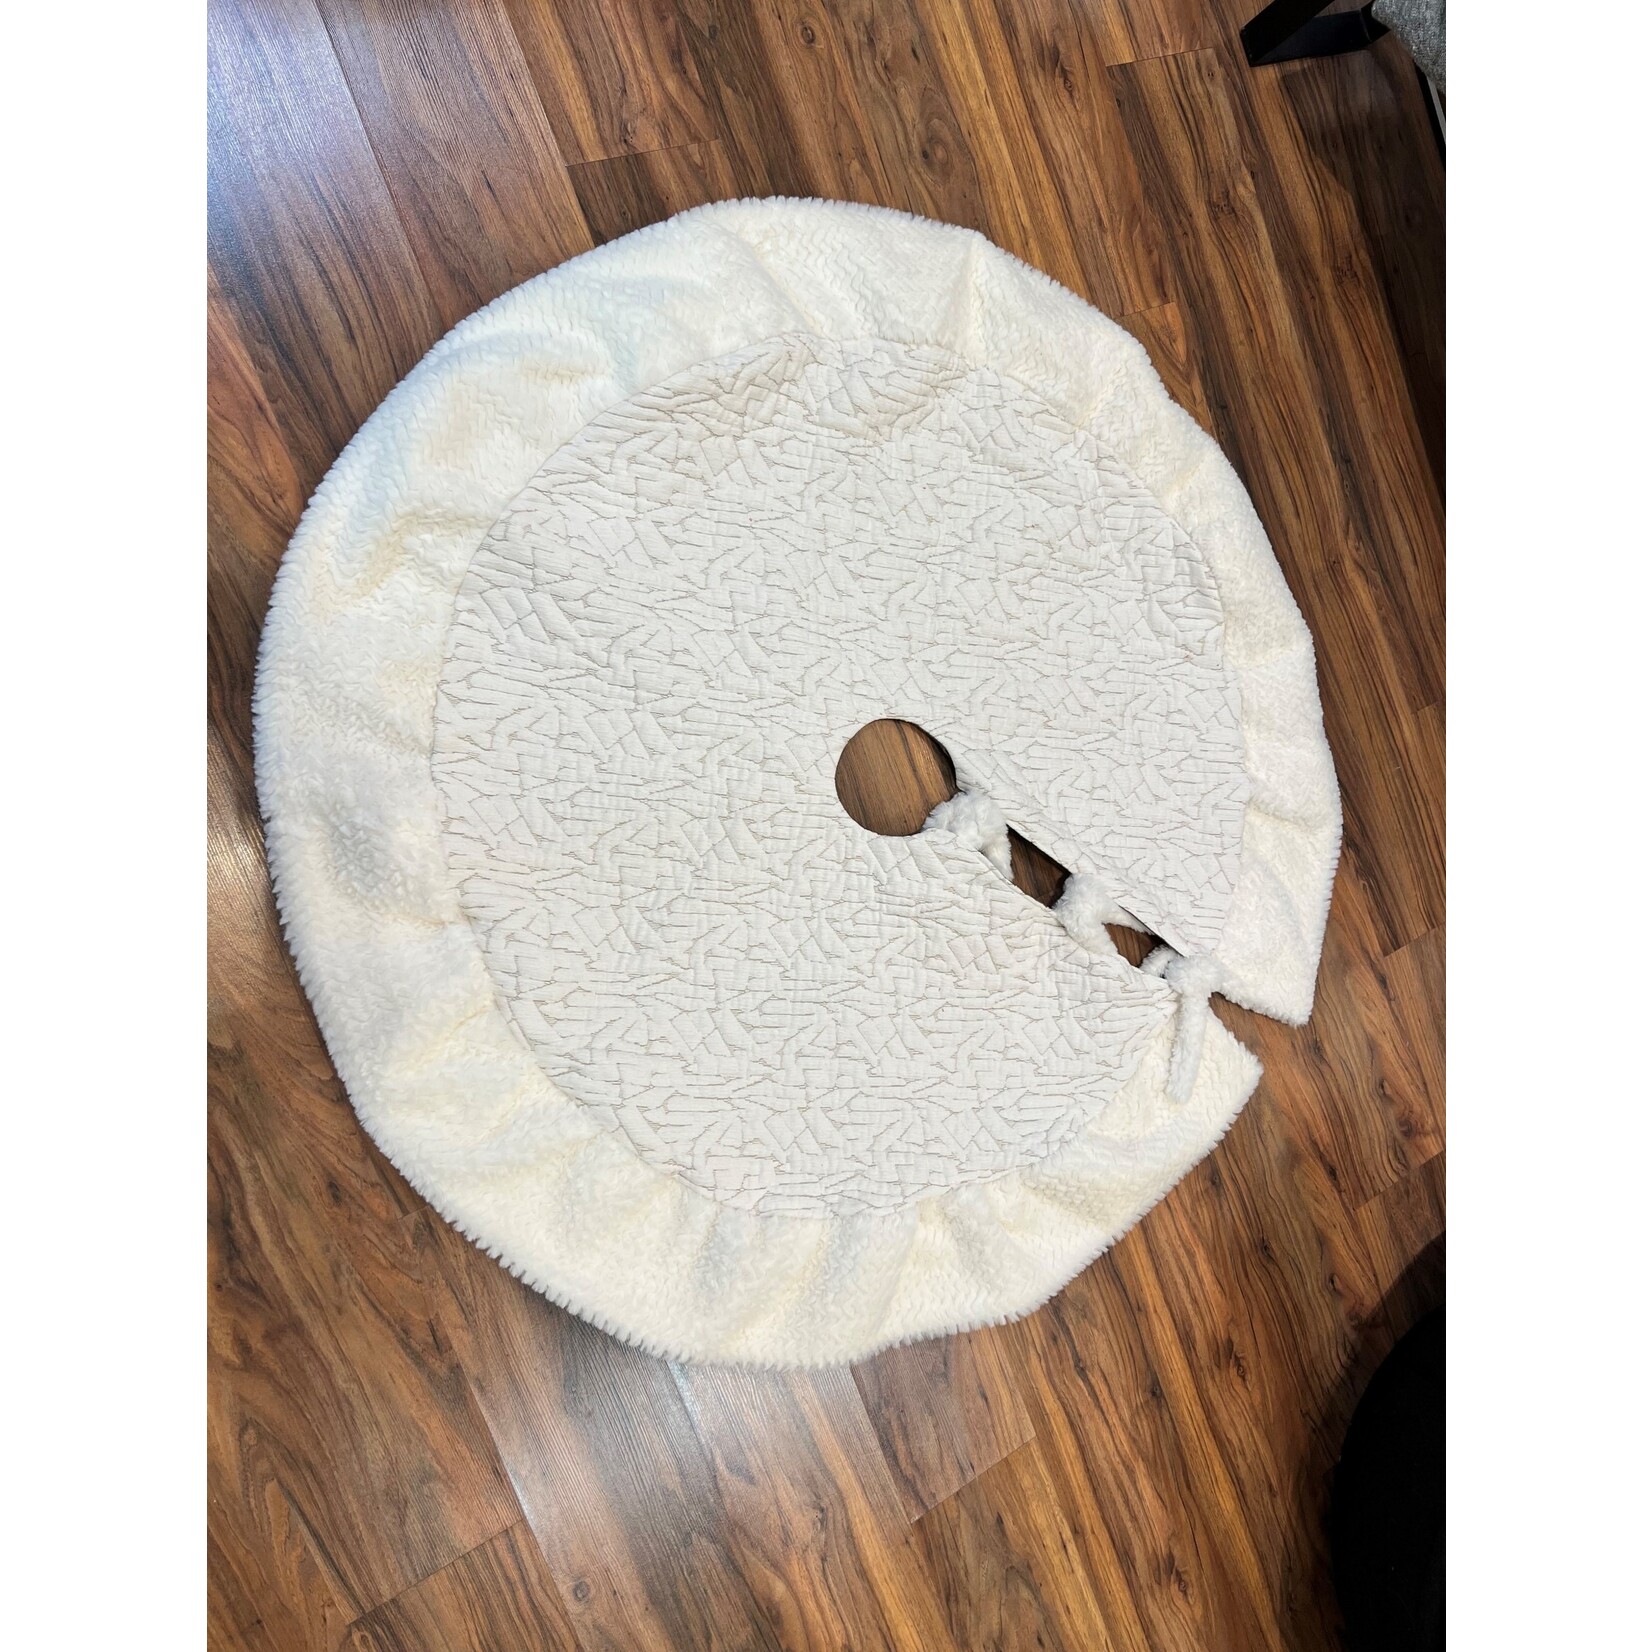 Nicky's Notions White Texture with Fur Trim Tree Skirt